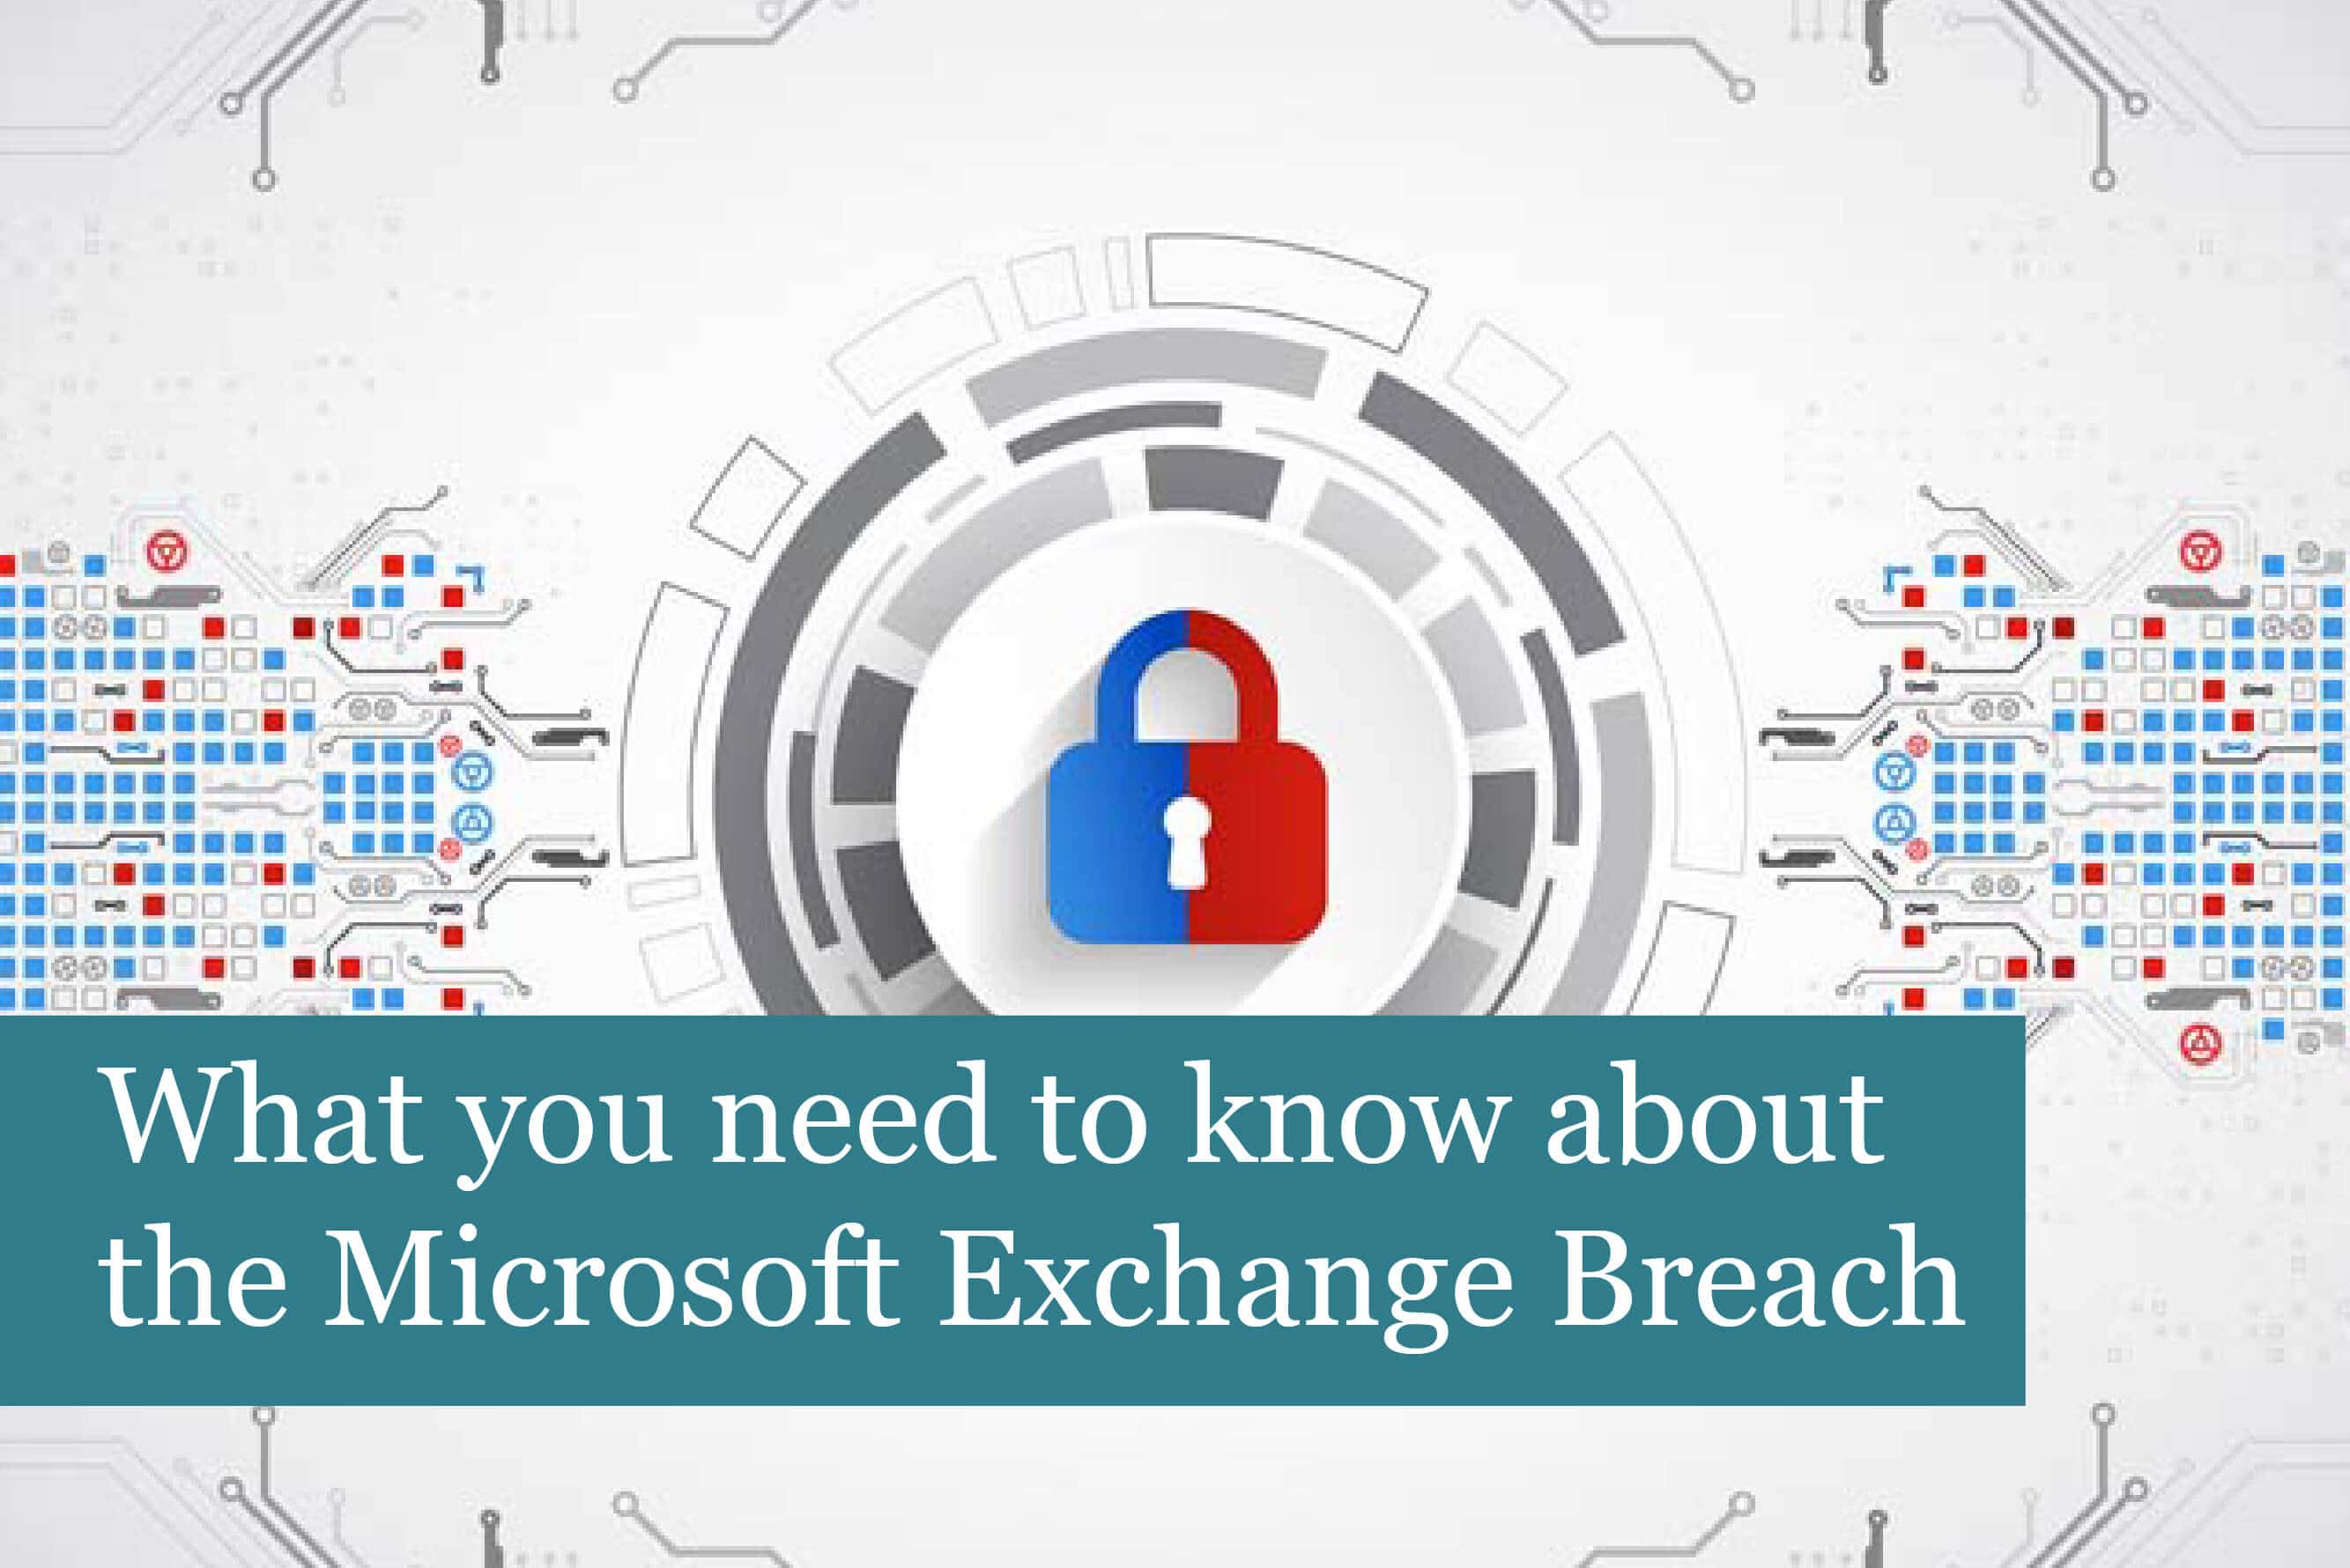 What you need to know about the Microsoft Exchange Breach